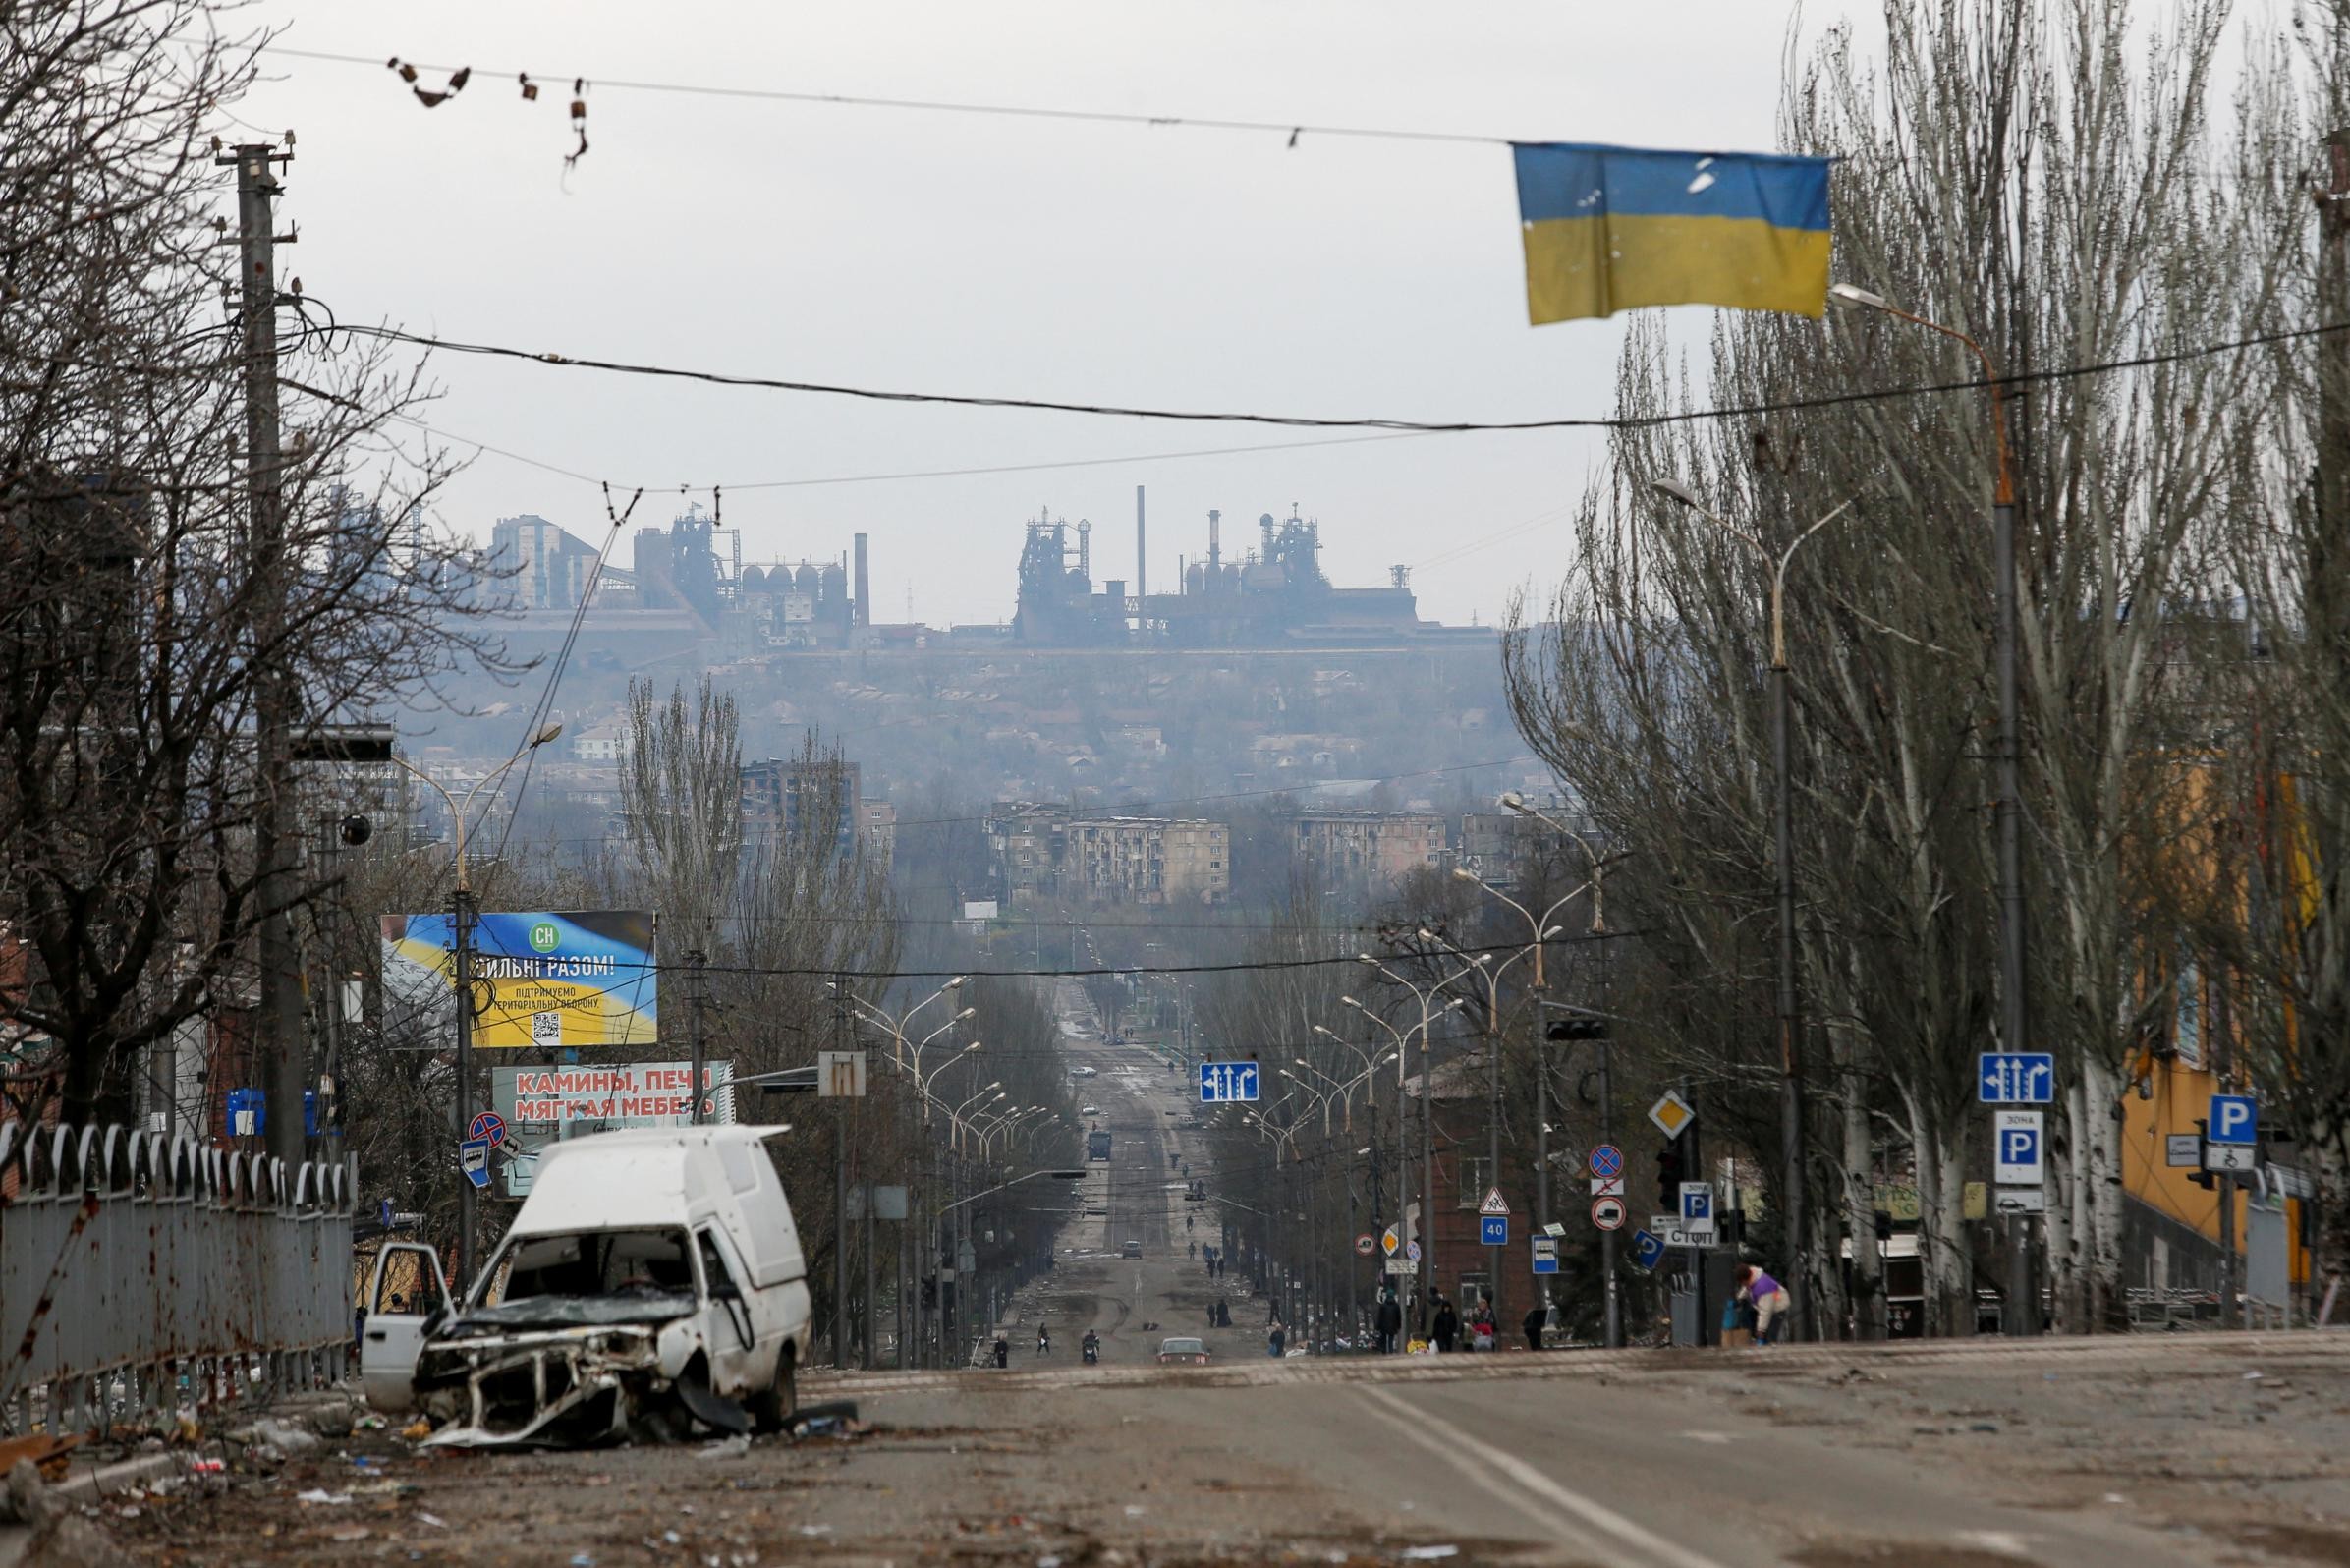 “It means the end of the battle at that location”: will the white flag be raised in Mariupol?